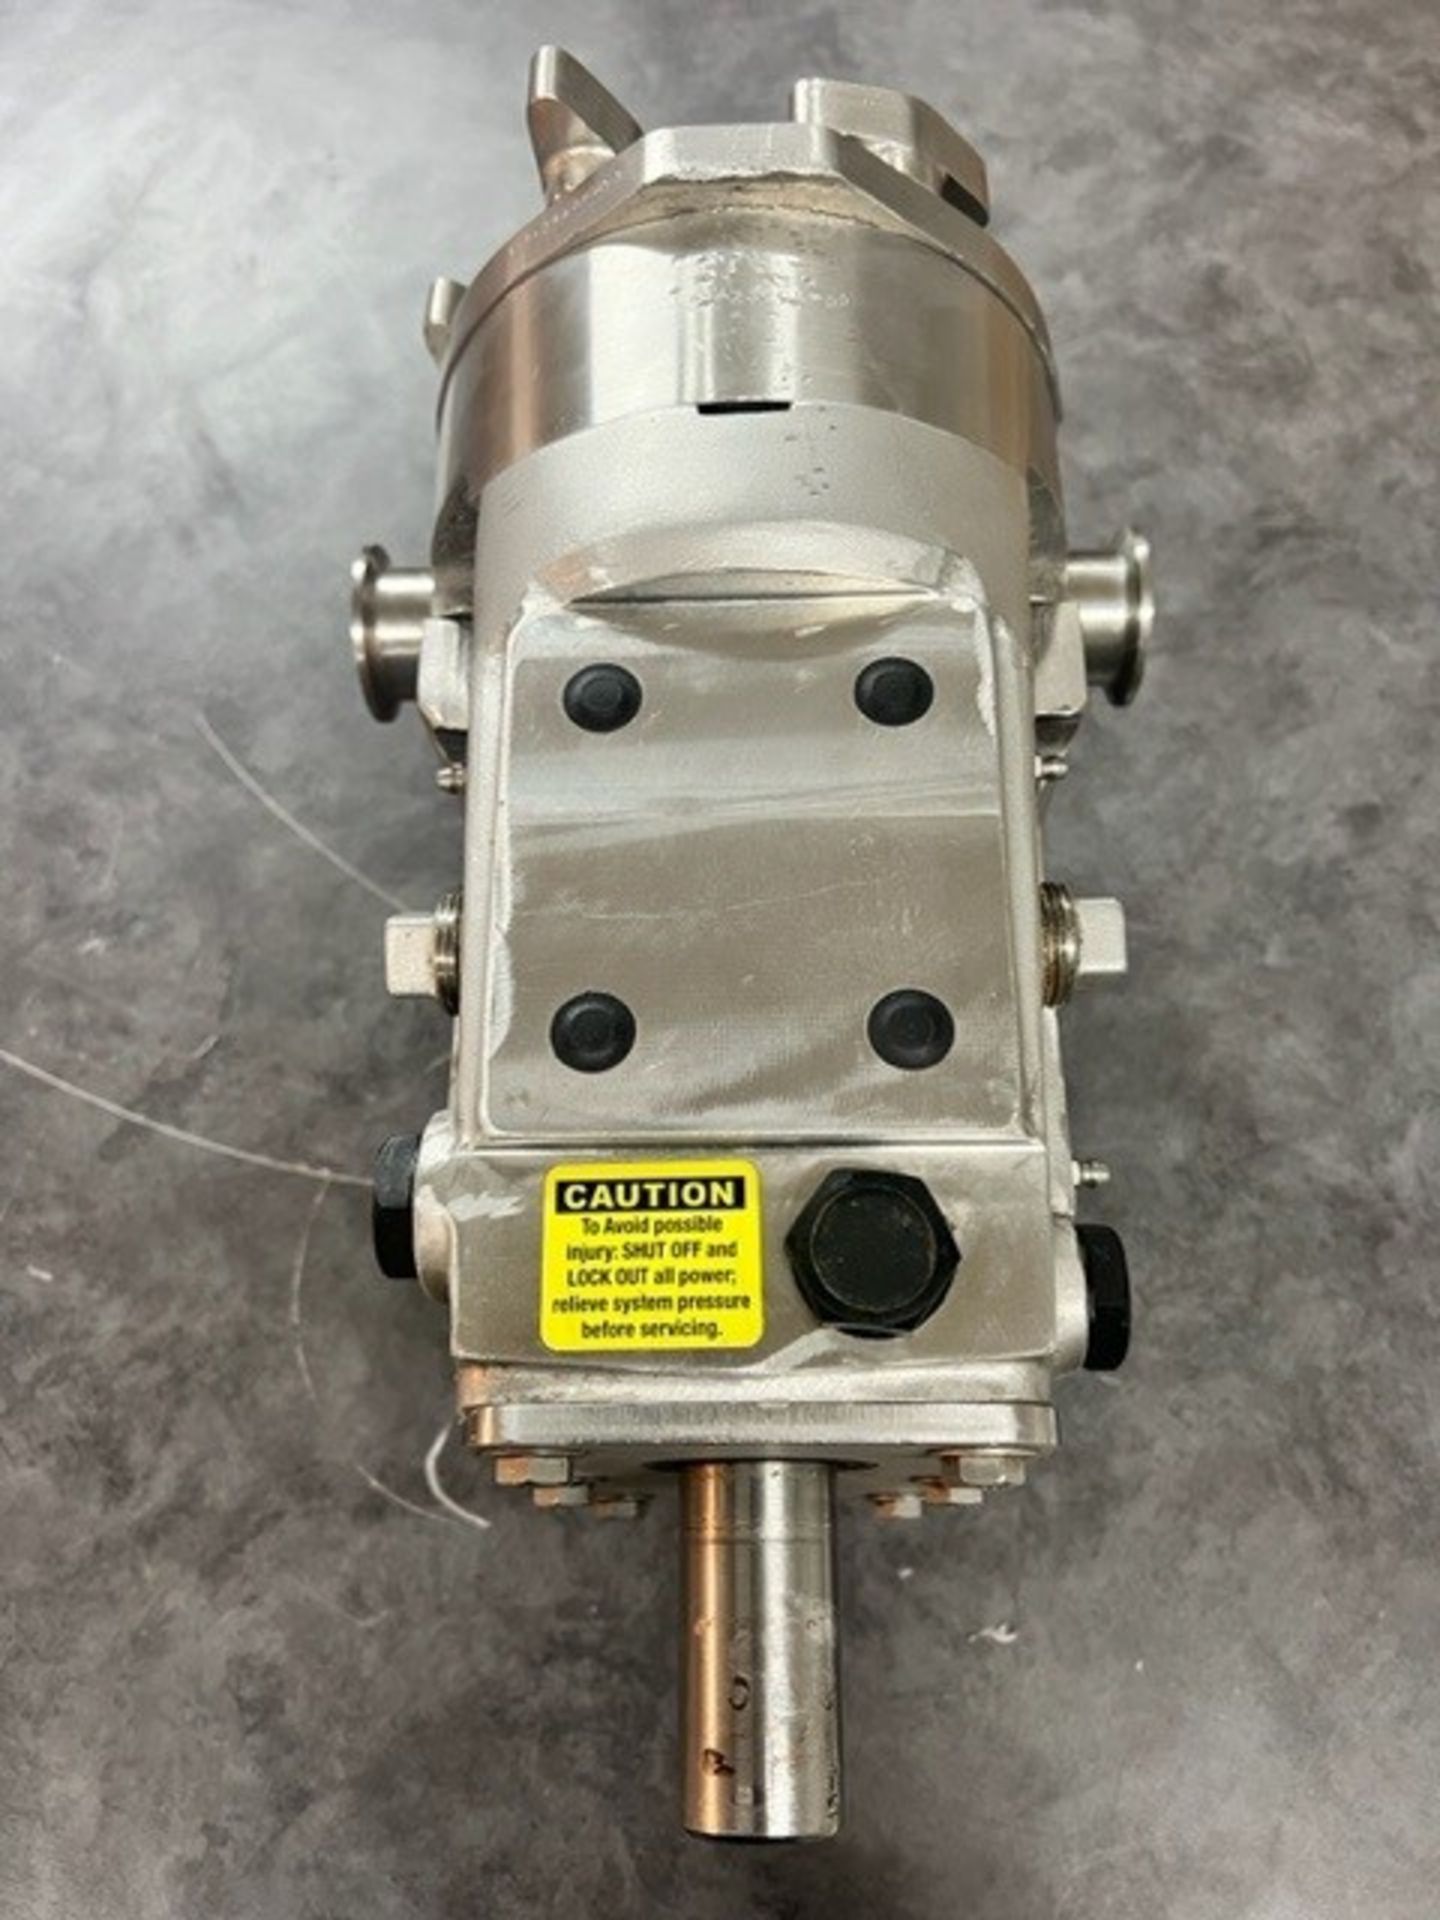 Ampco 1.5 inch Positive Pump, Model ZP1-030-SO*, S/N CC-80227-1-1 with Stainless Rotors, All - Image 3 of 6